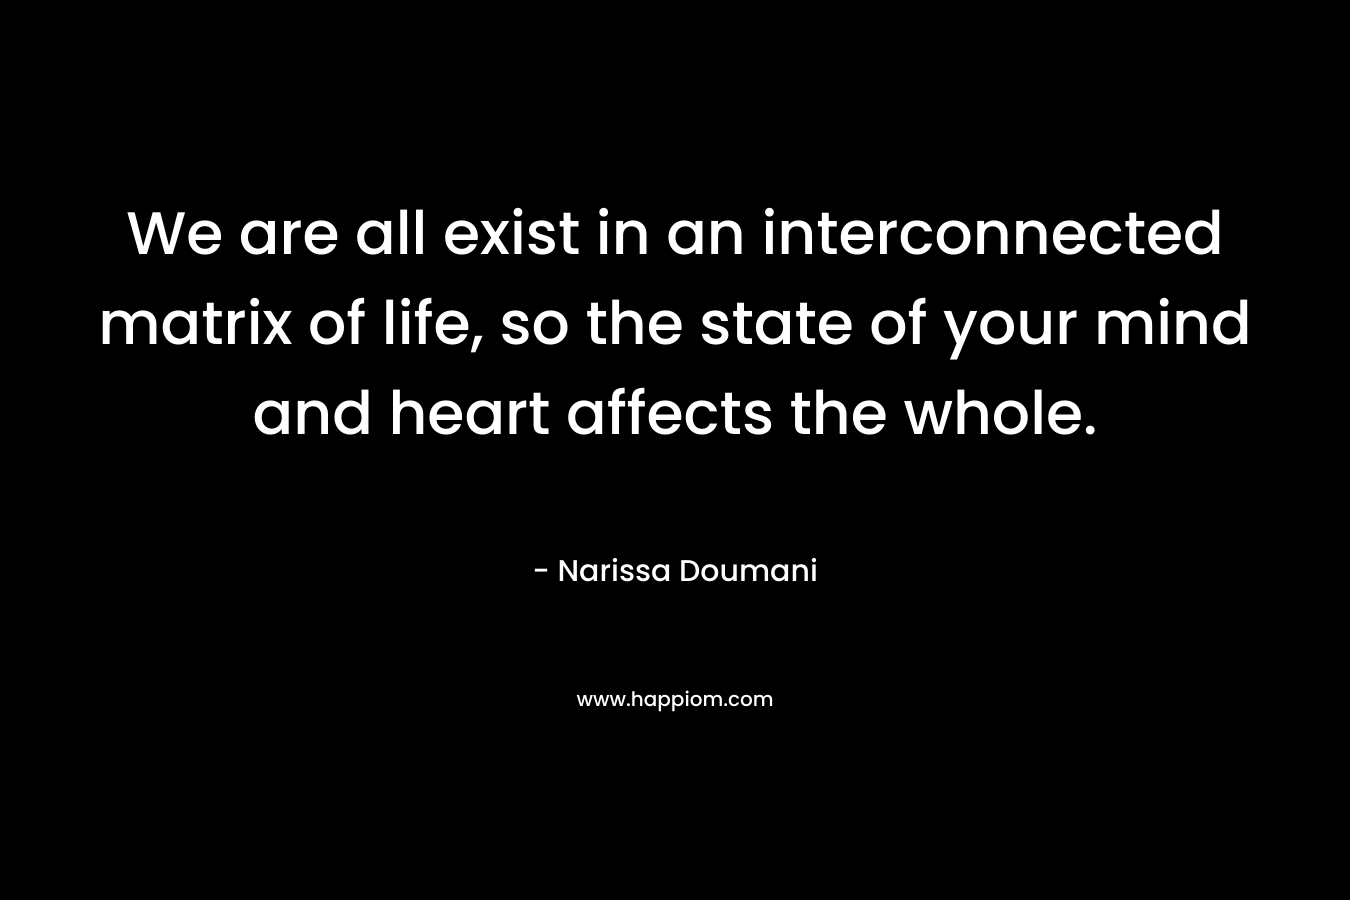 We are all exist in an interconnected matrix of life, so the state of your mind and heart affects the whole. – Narissa Doumani